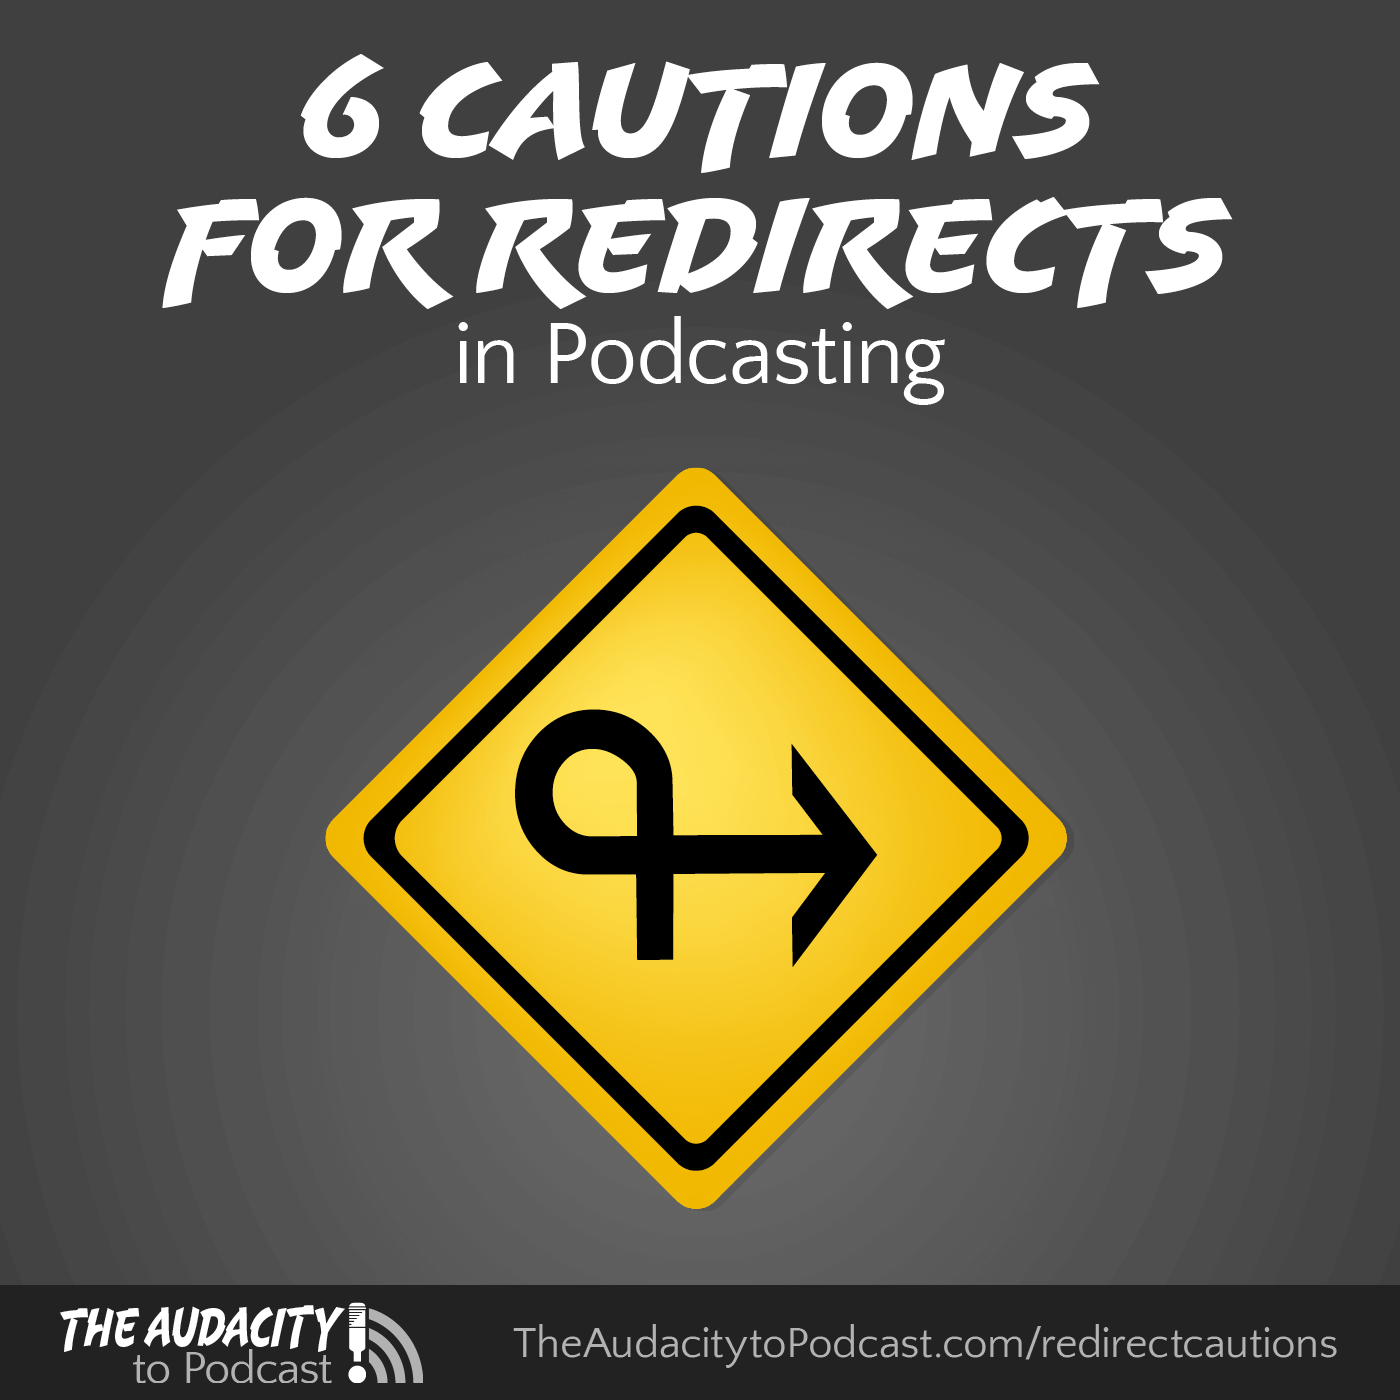 6 Cautions When Using Redirects in Podcasting (plus best practices)